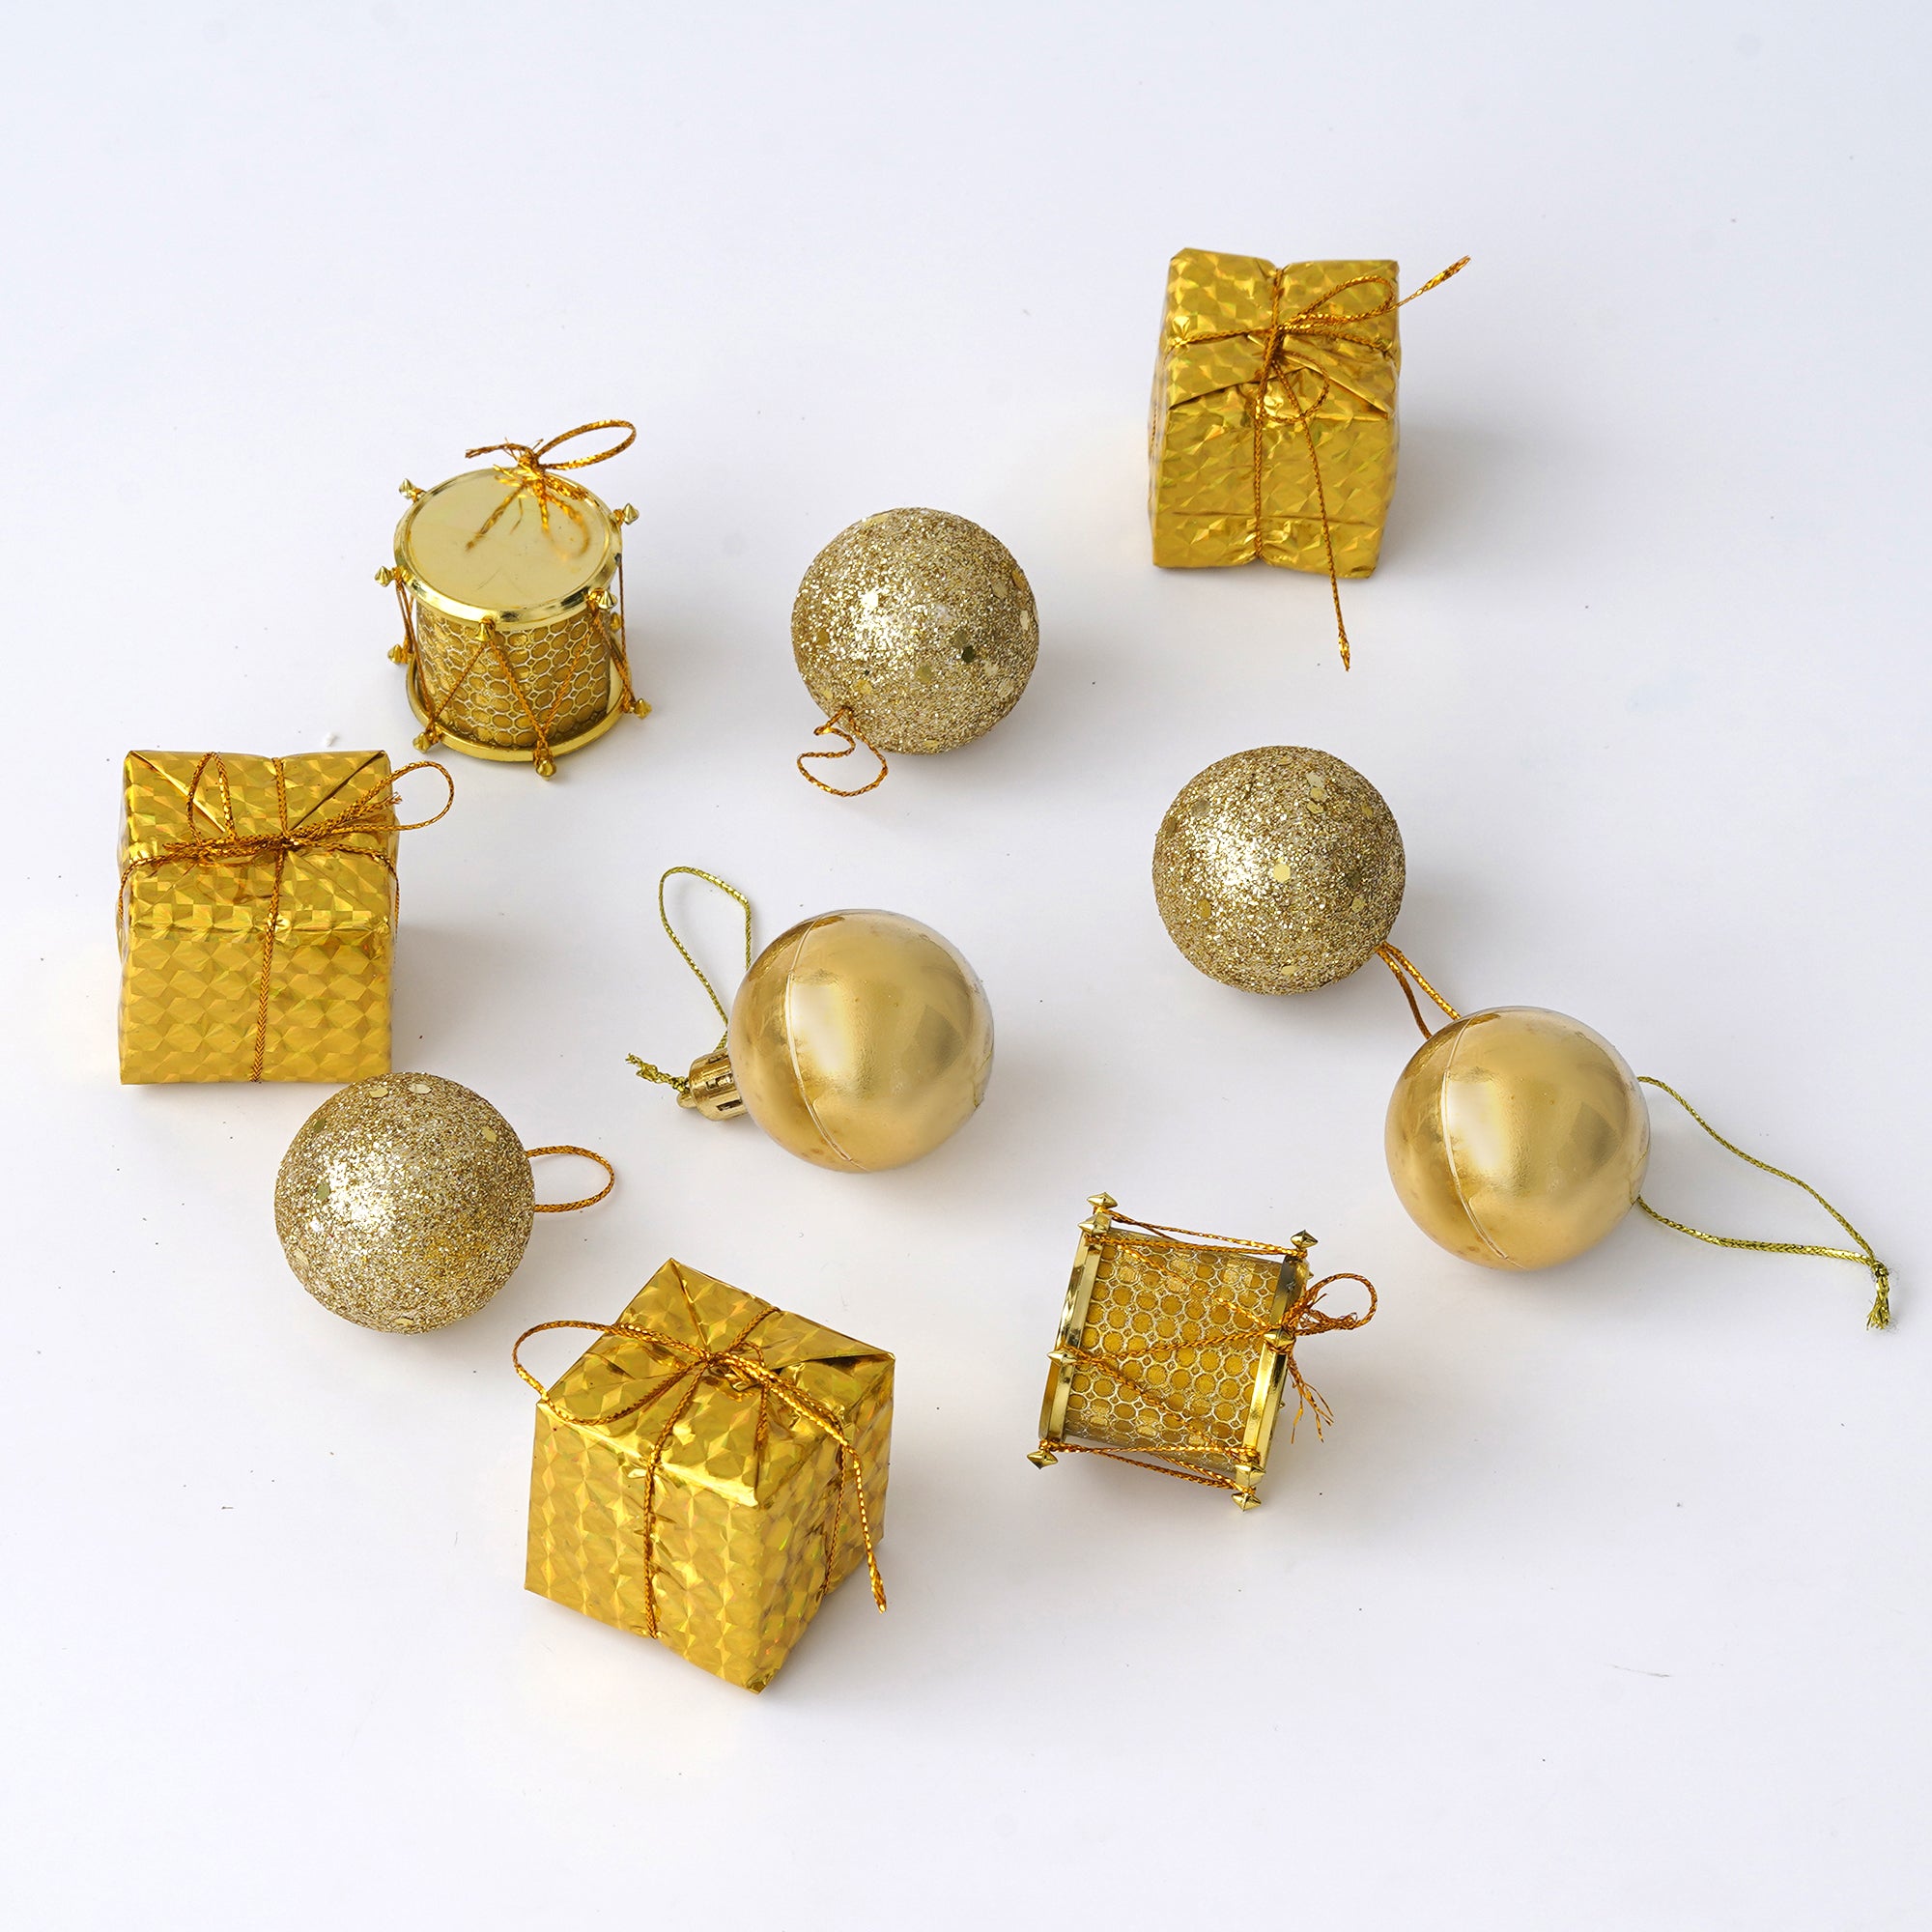 eCraftIndia Golden Christmas Tree Decoration Items  Balls, Gifts, Drums 2